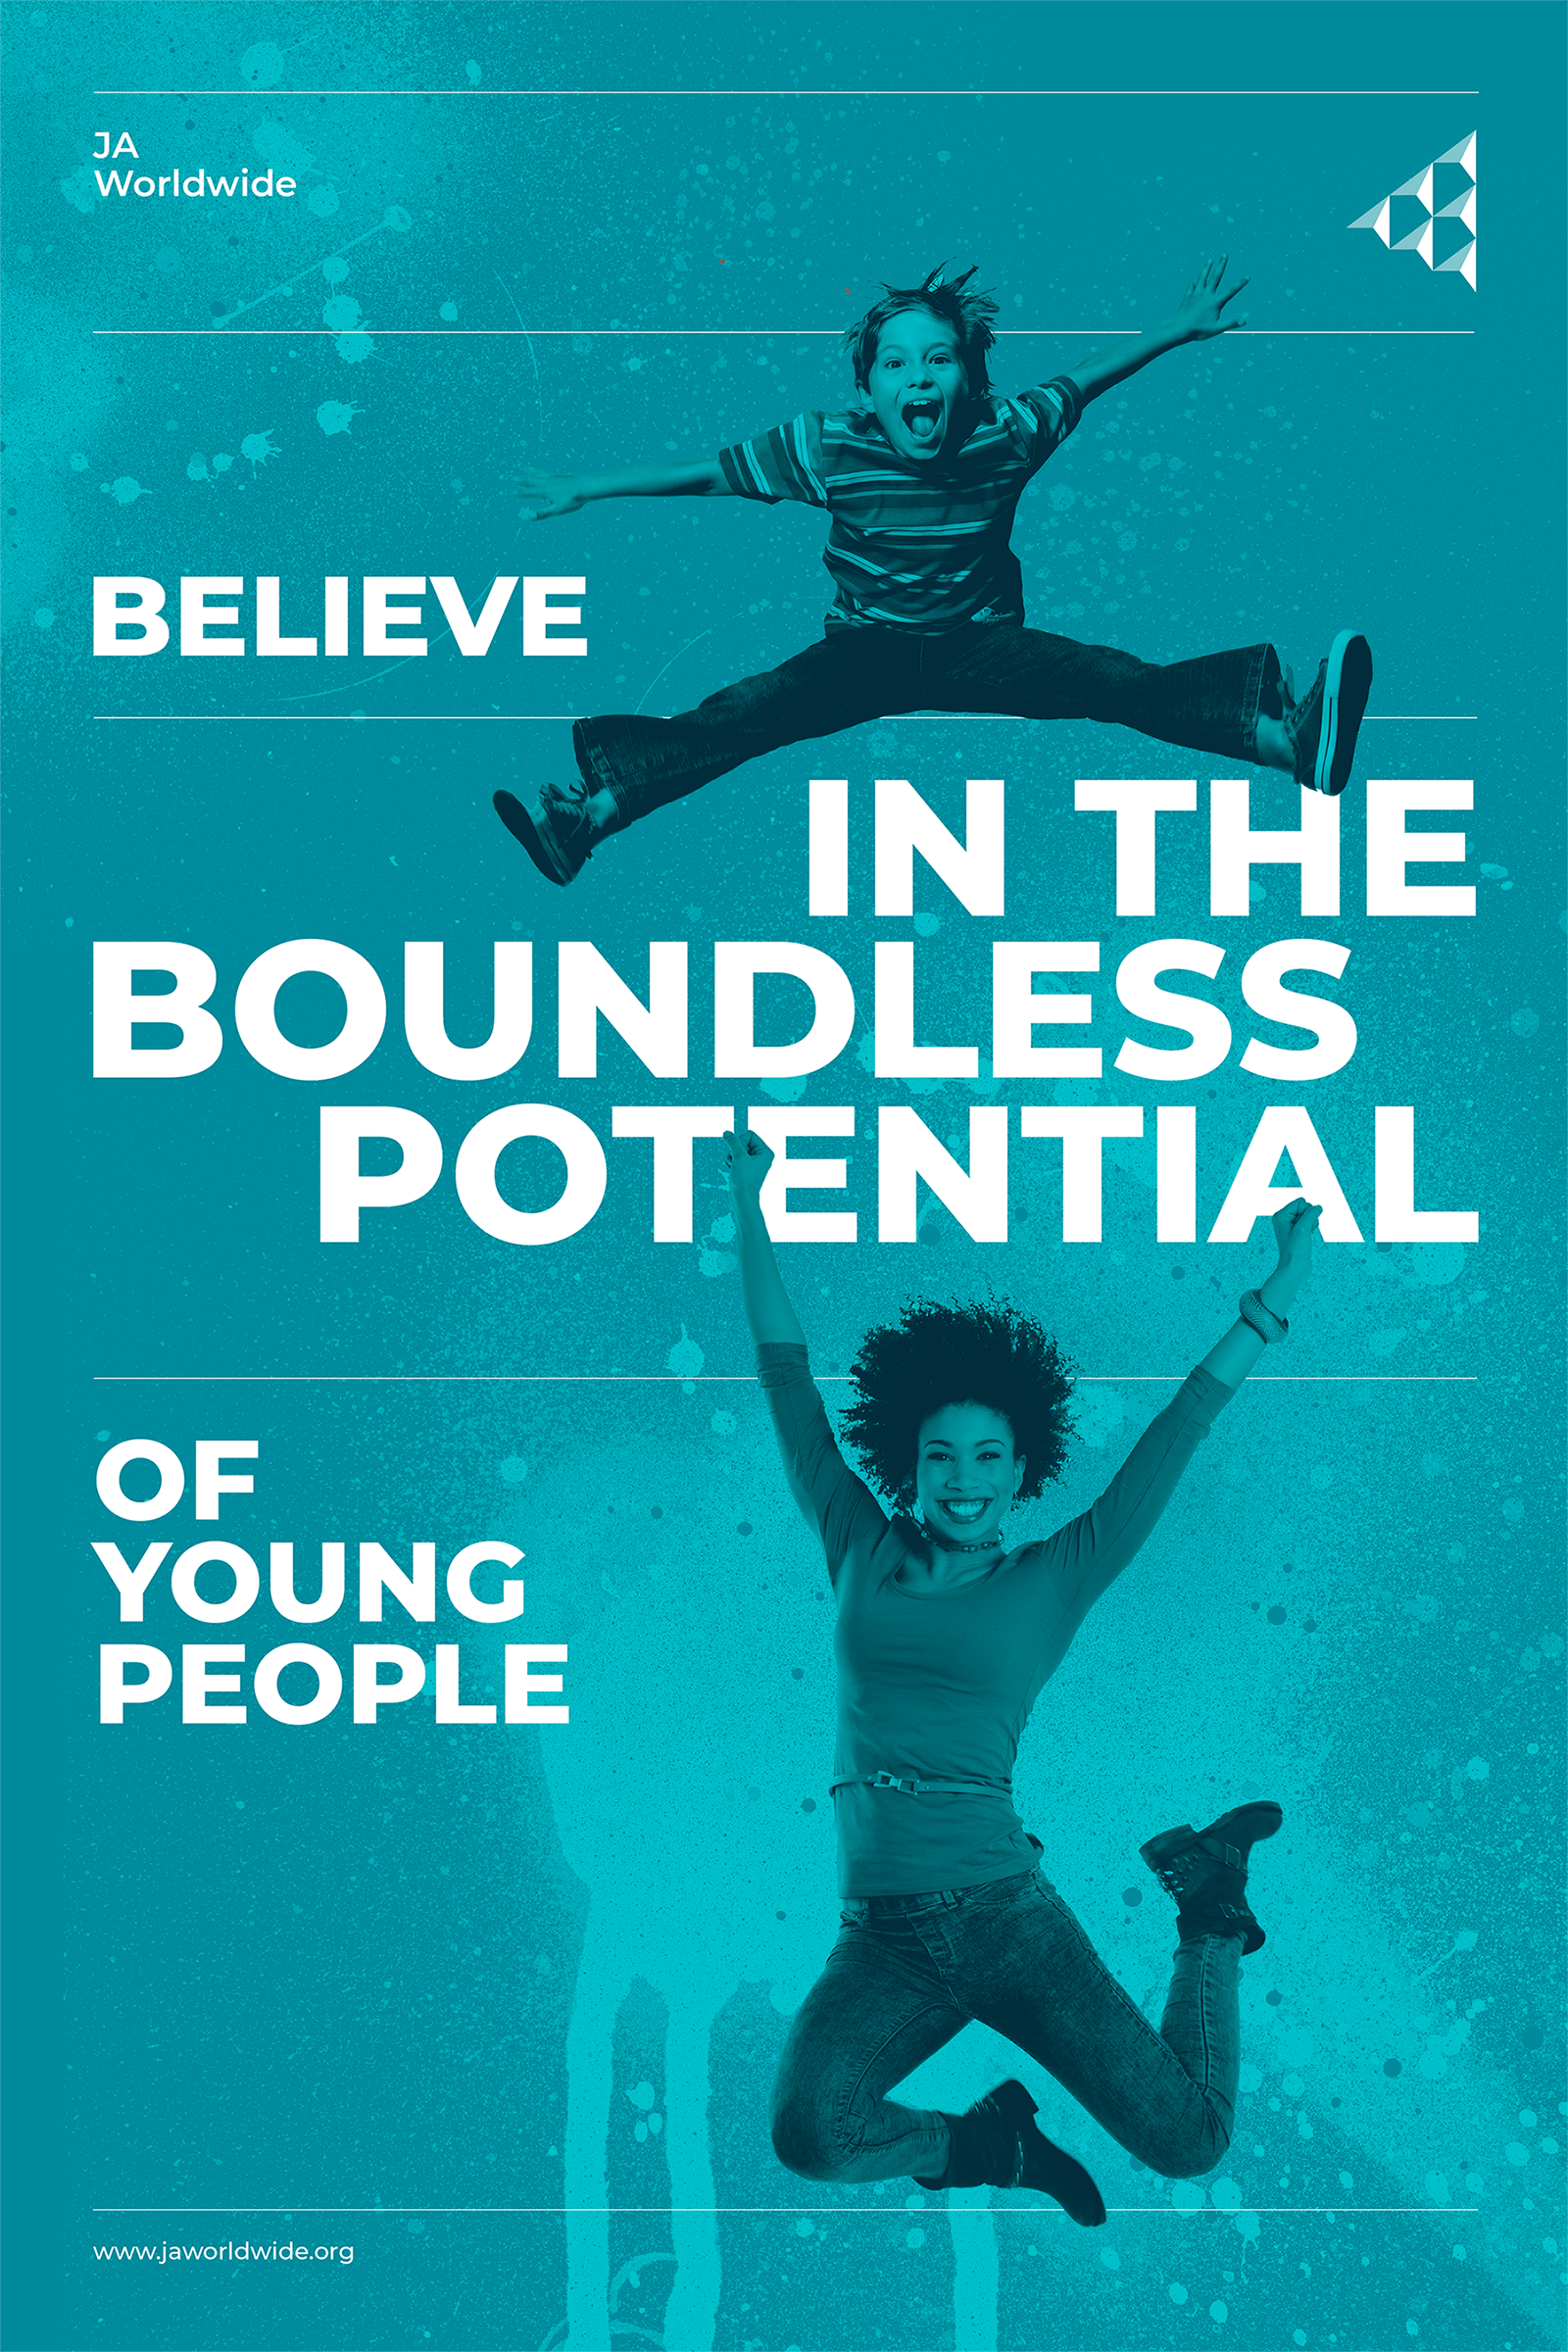 Believe in the Boldness potential of young people